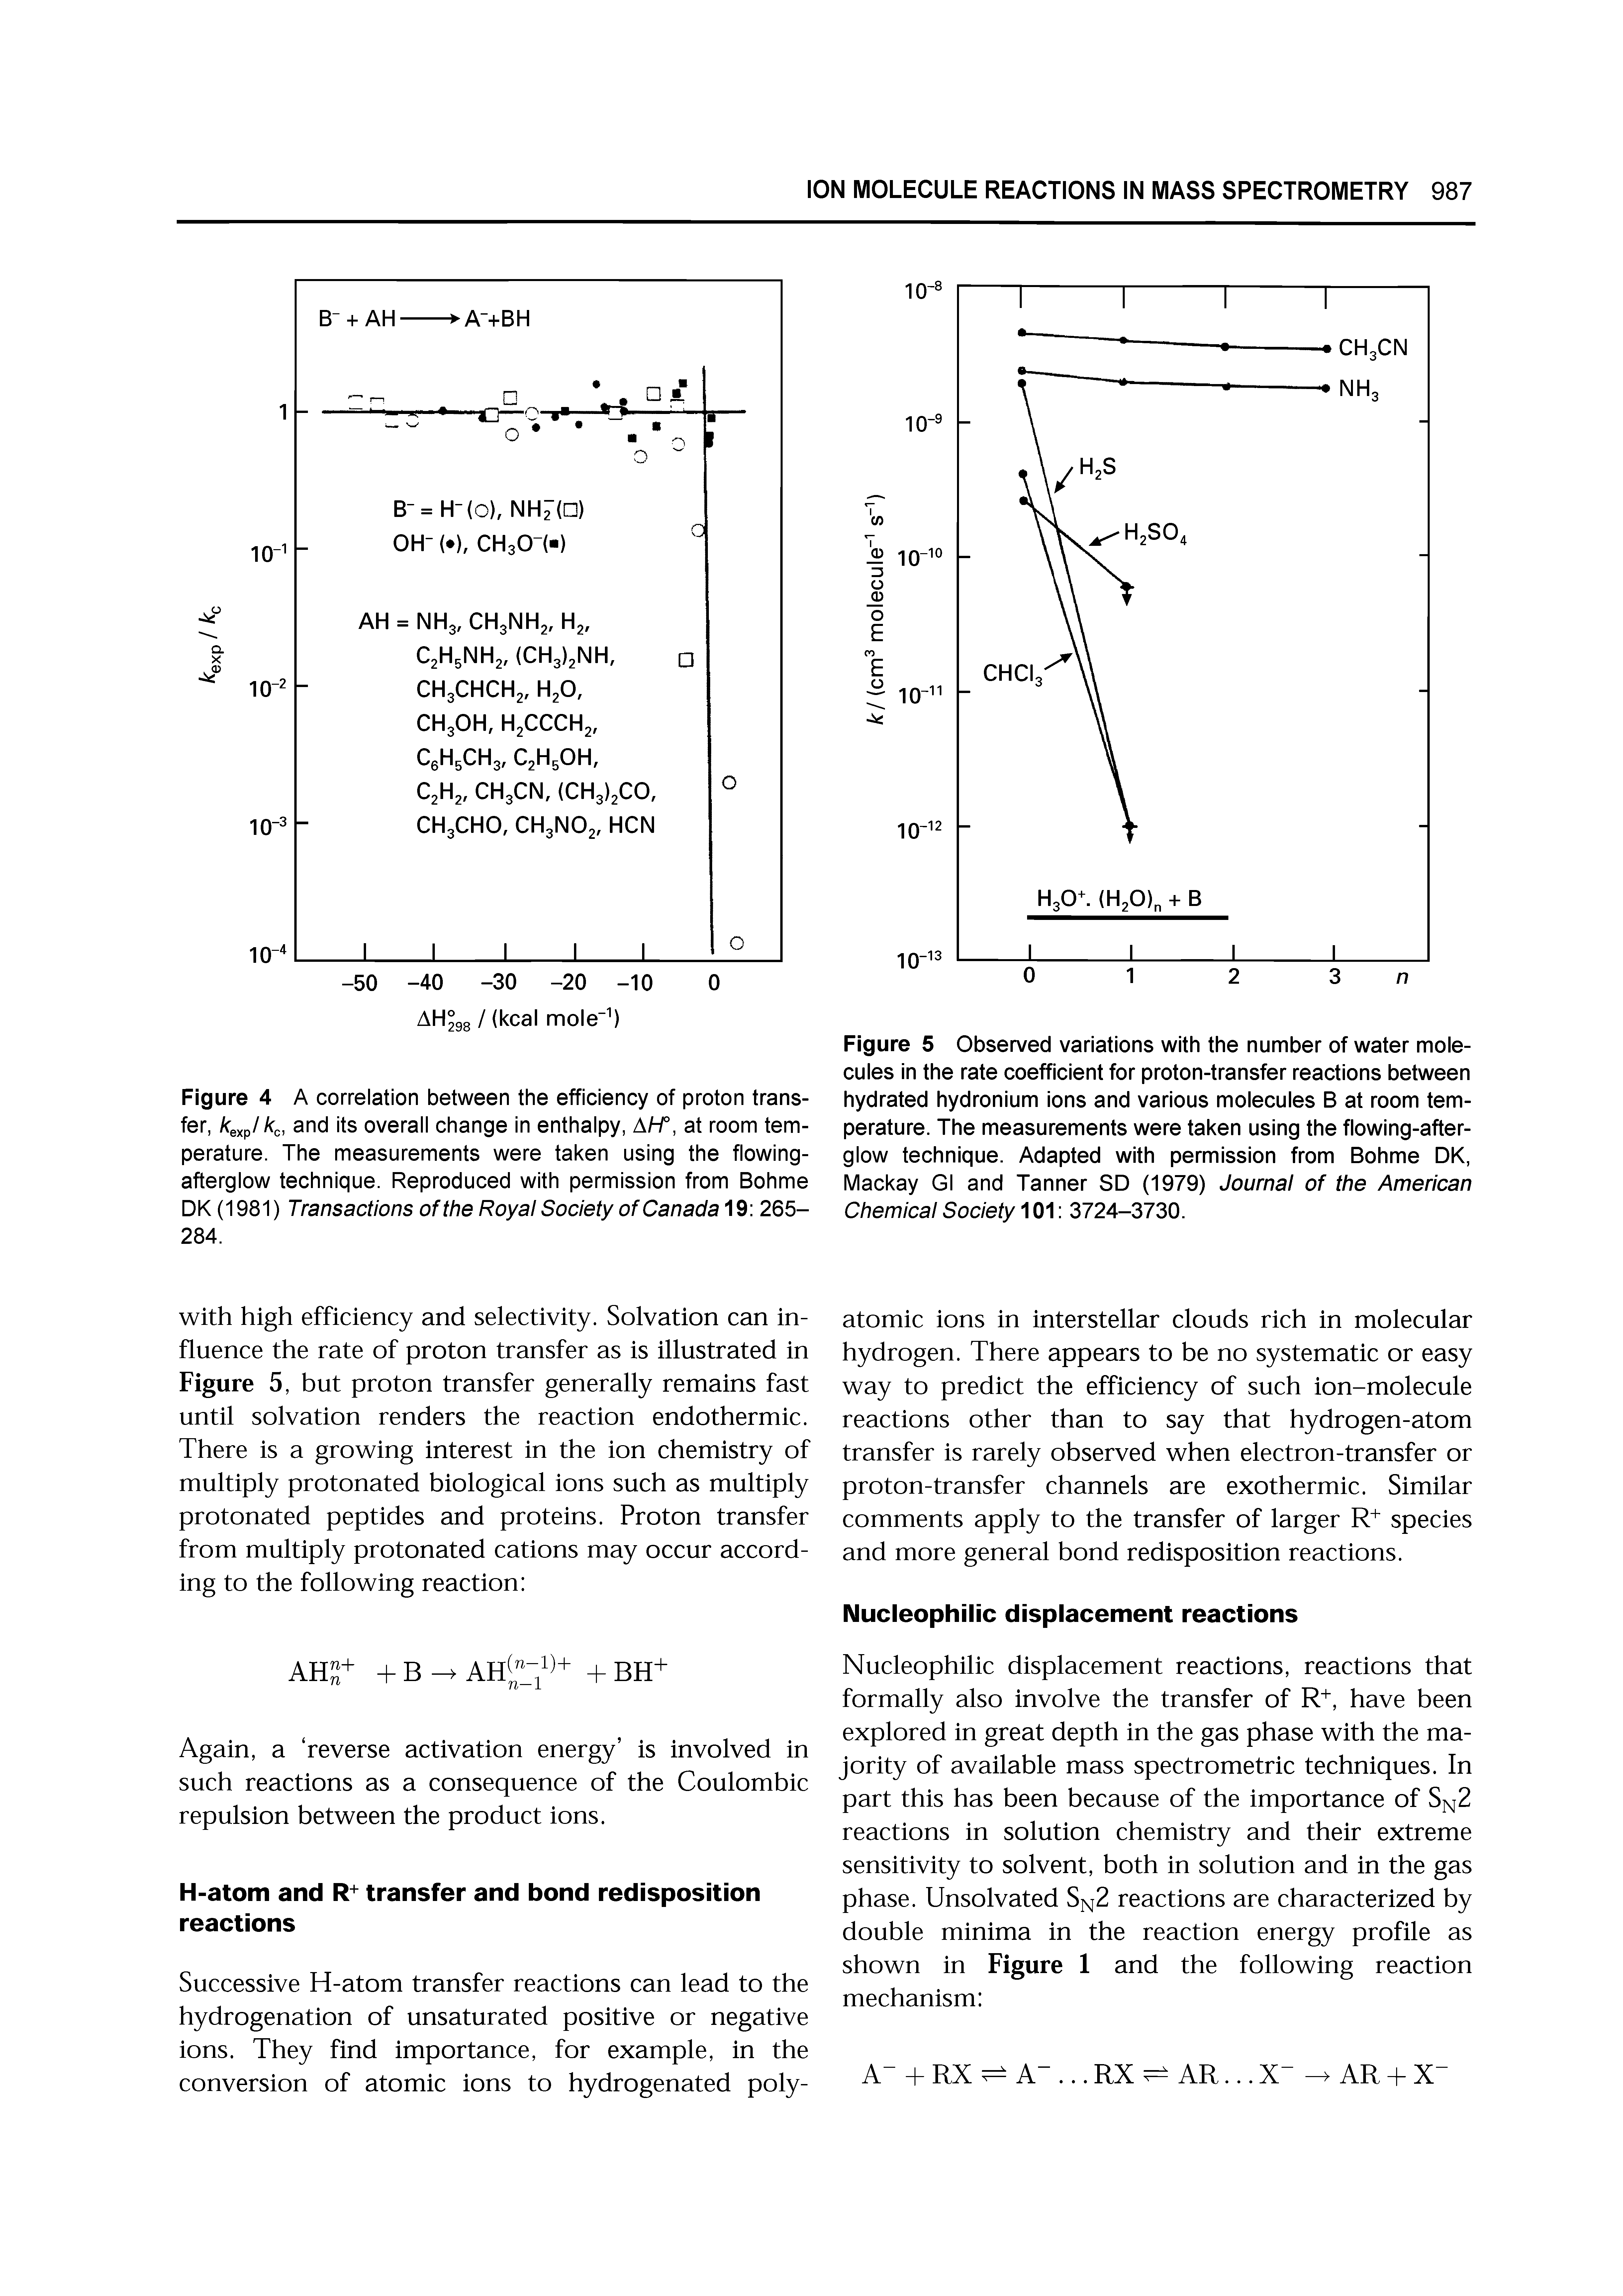 Figure 4 A correlation between the efficiency of proton transfer, /Cexp//Cc, and its overall change in enthalpy, AH , at room temperature. The measurements were taken using the flowing-afterglow technique. Reproduced with permission from Bohme DK (1981) Transactions of the Royal Society of Canada 19 265-284.